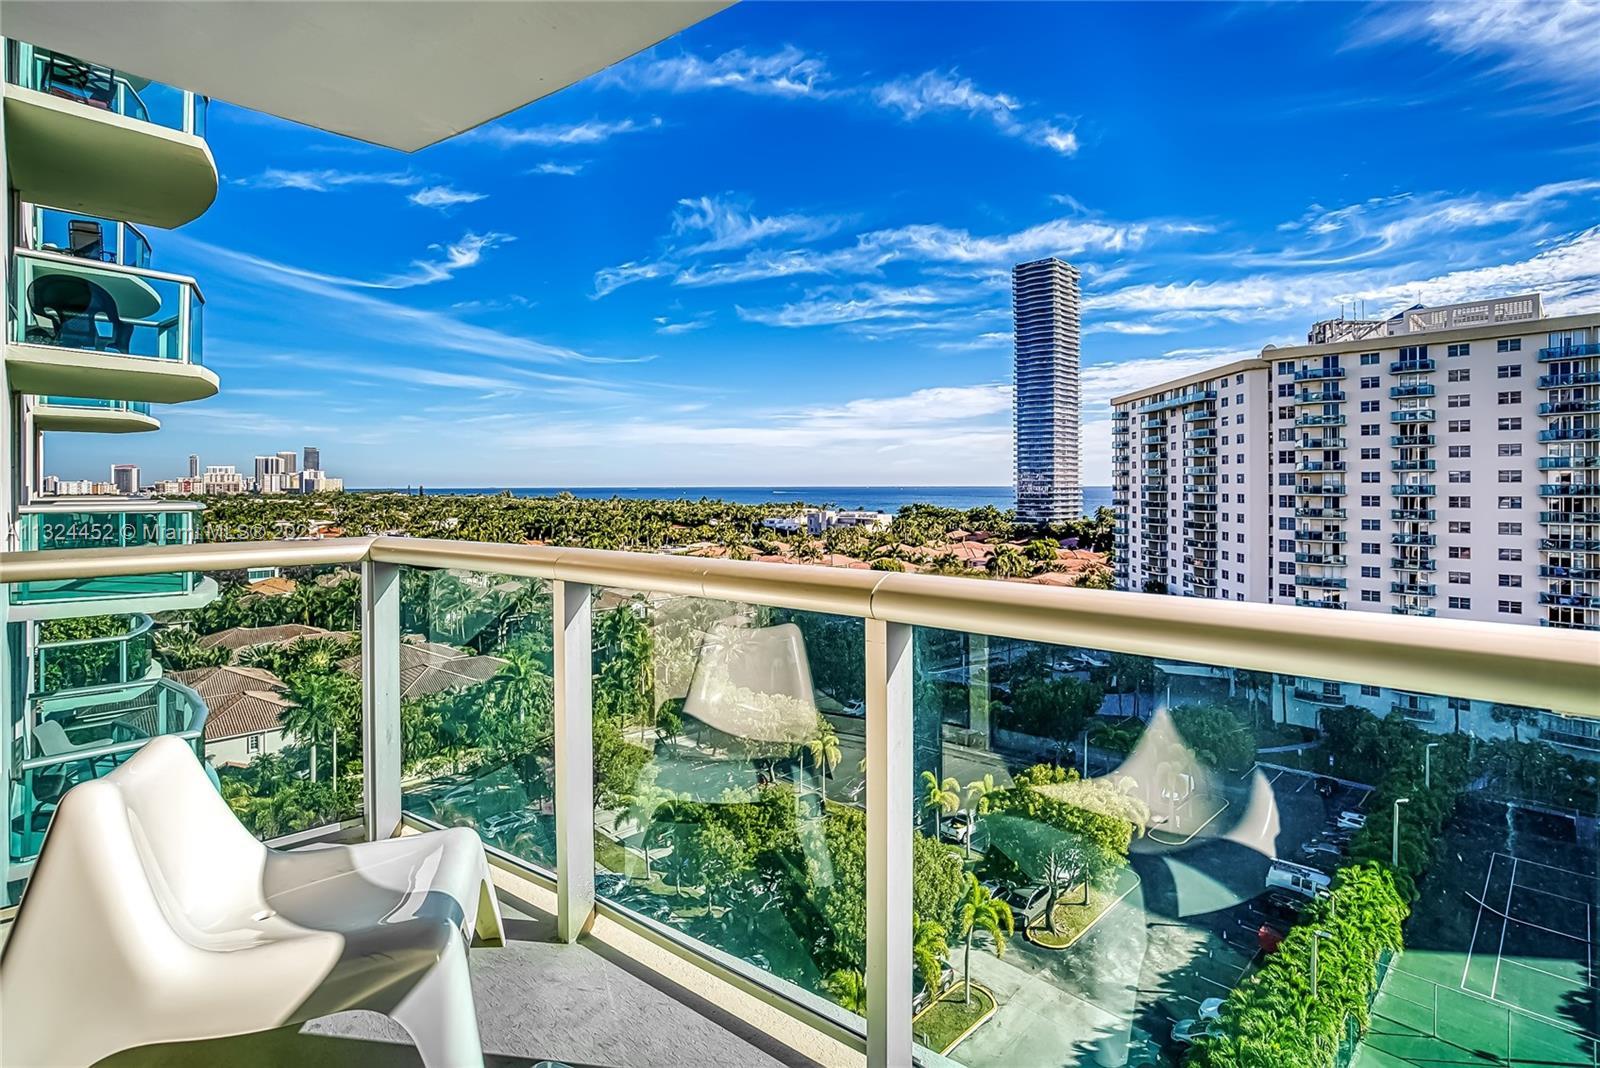 BEAUTIFUL AND SPACIOUS 1/1 CONDO IN THE HEART OF SUNNY ISLES BEACH WITH THE OCEAN VIEW. WALKING DIST